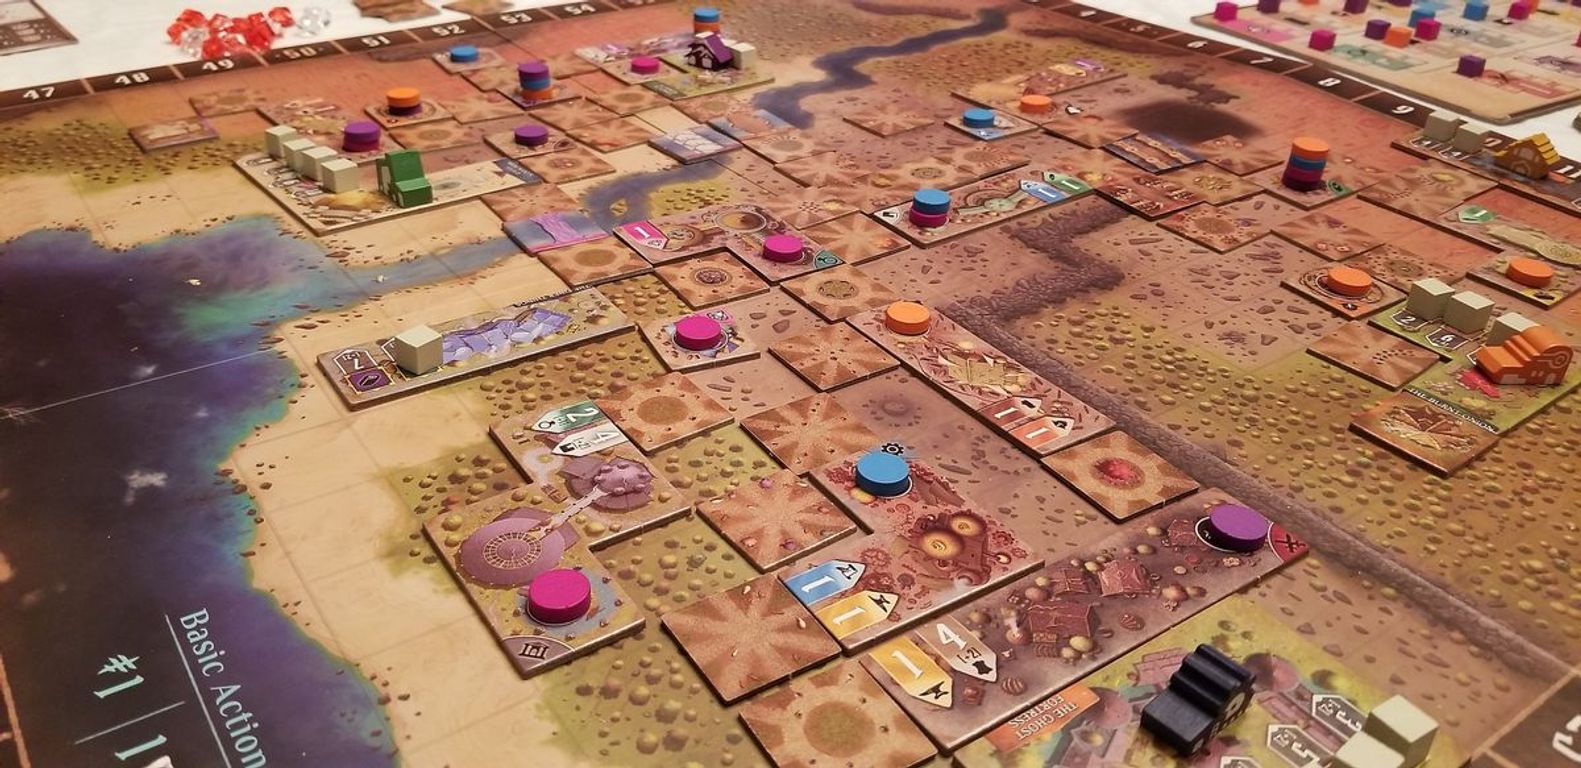 Founders of Gloomhaven gameplay